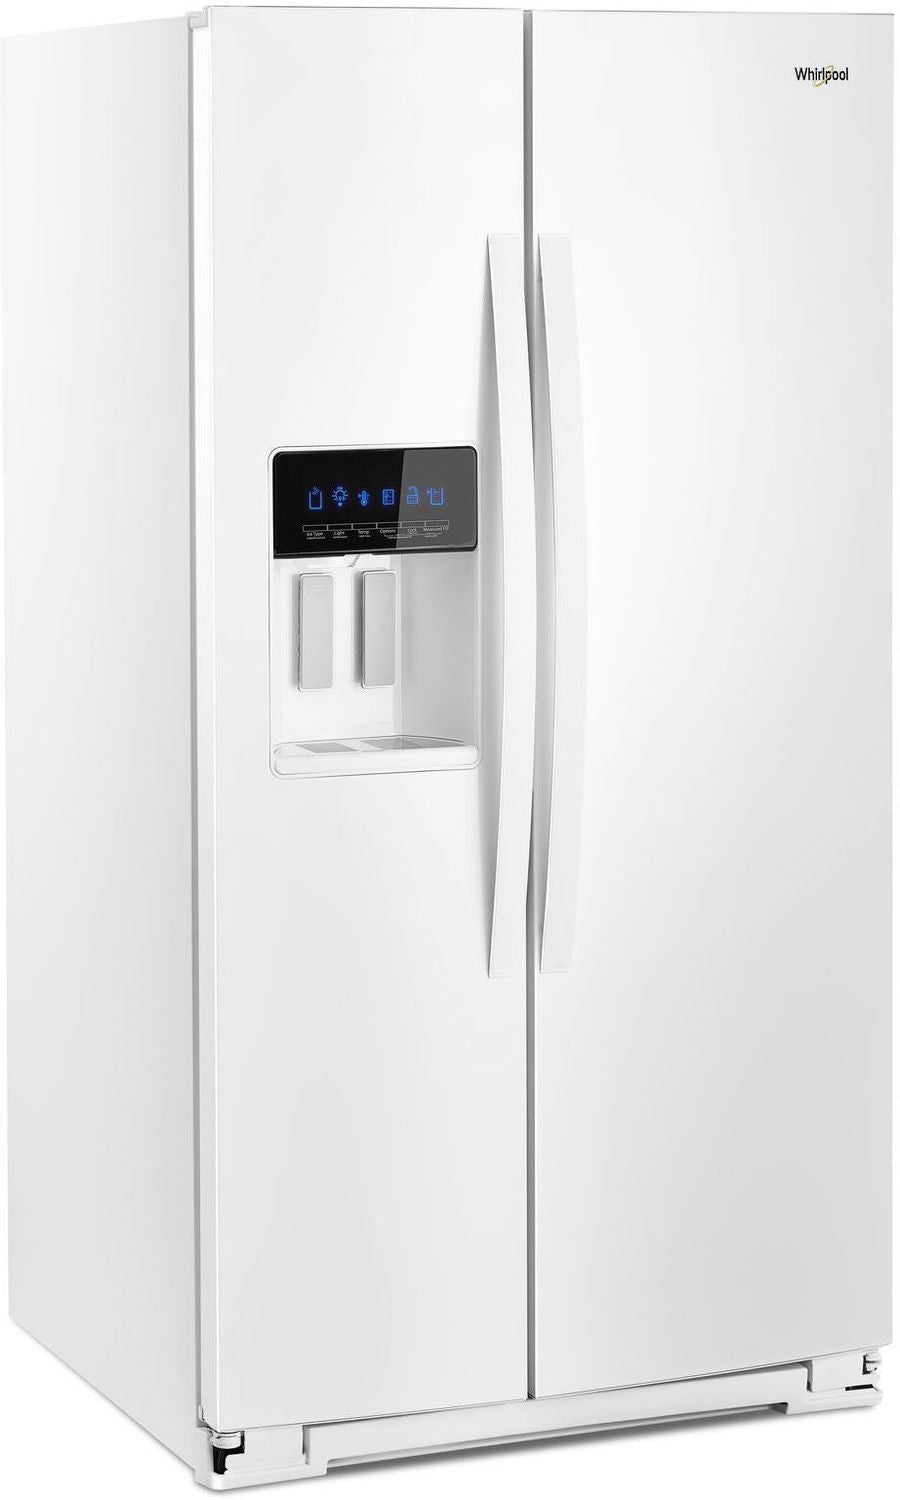 Whirlpool White Side-by-Side Refrigerator (28 Cu. Ft.) - WRS588FIHW